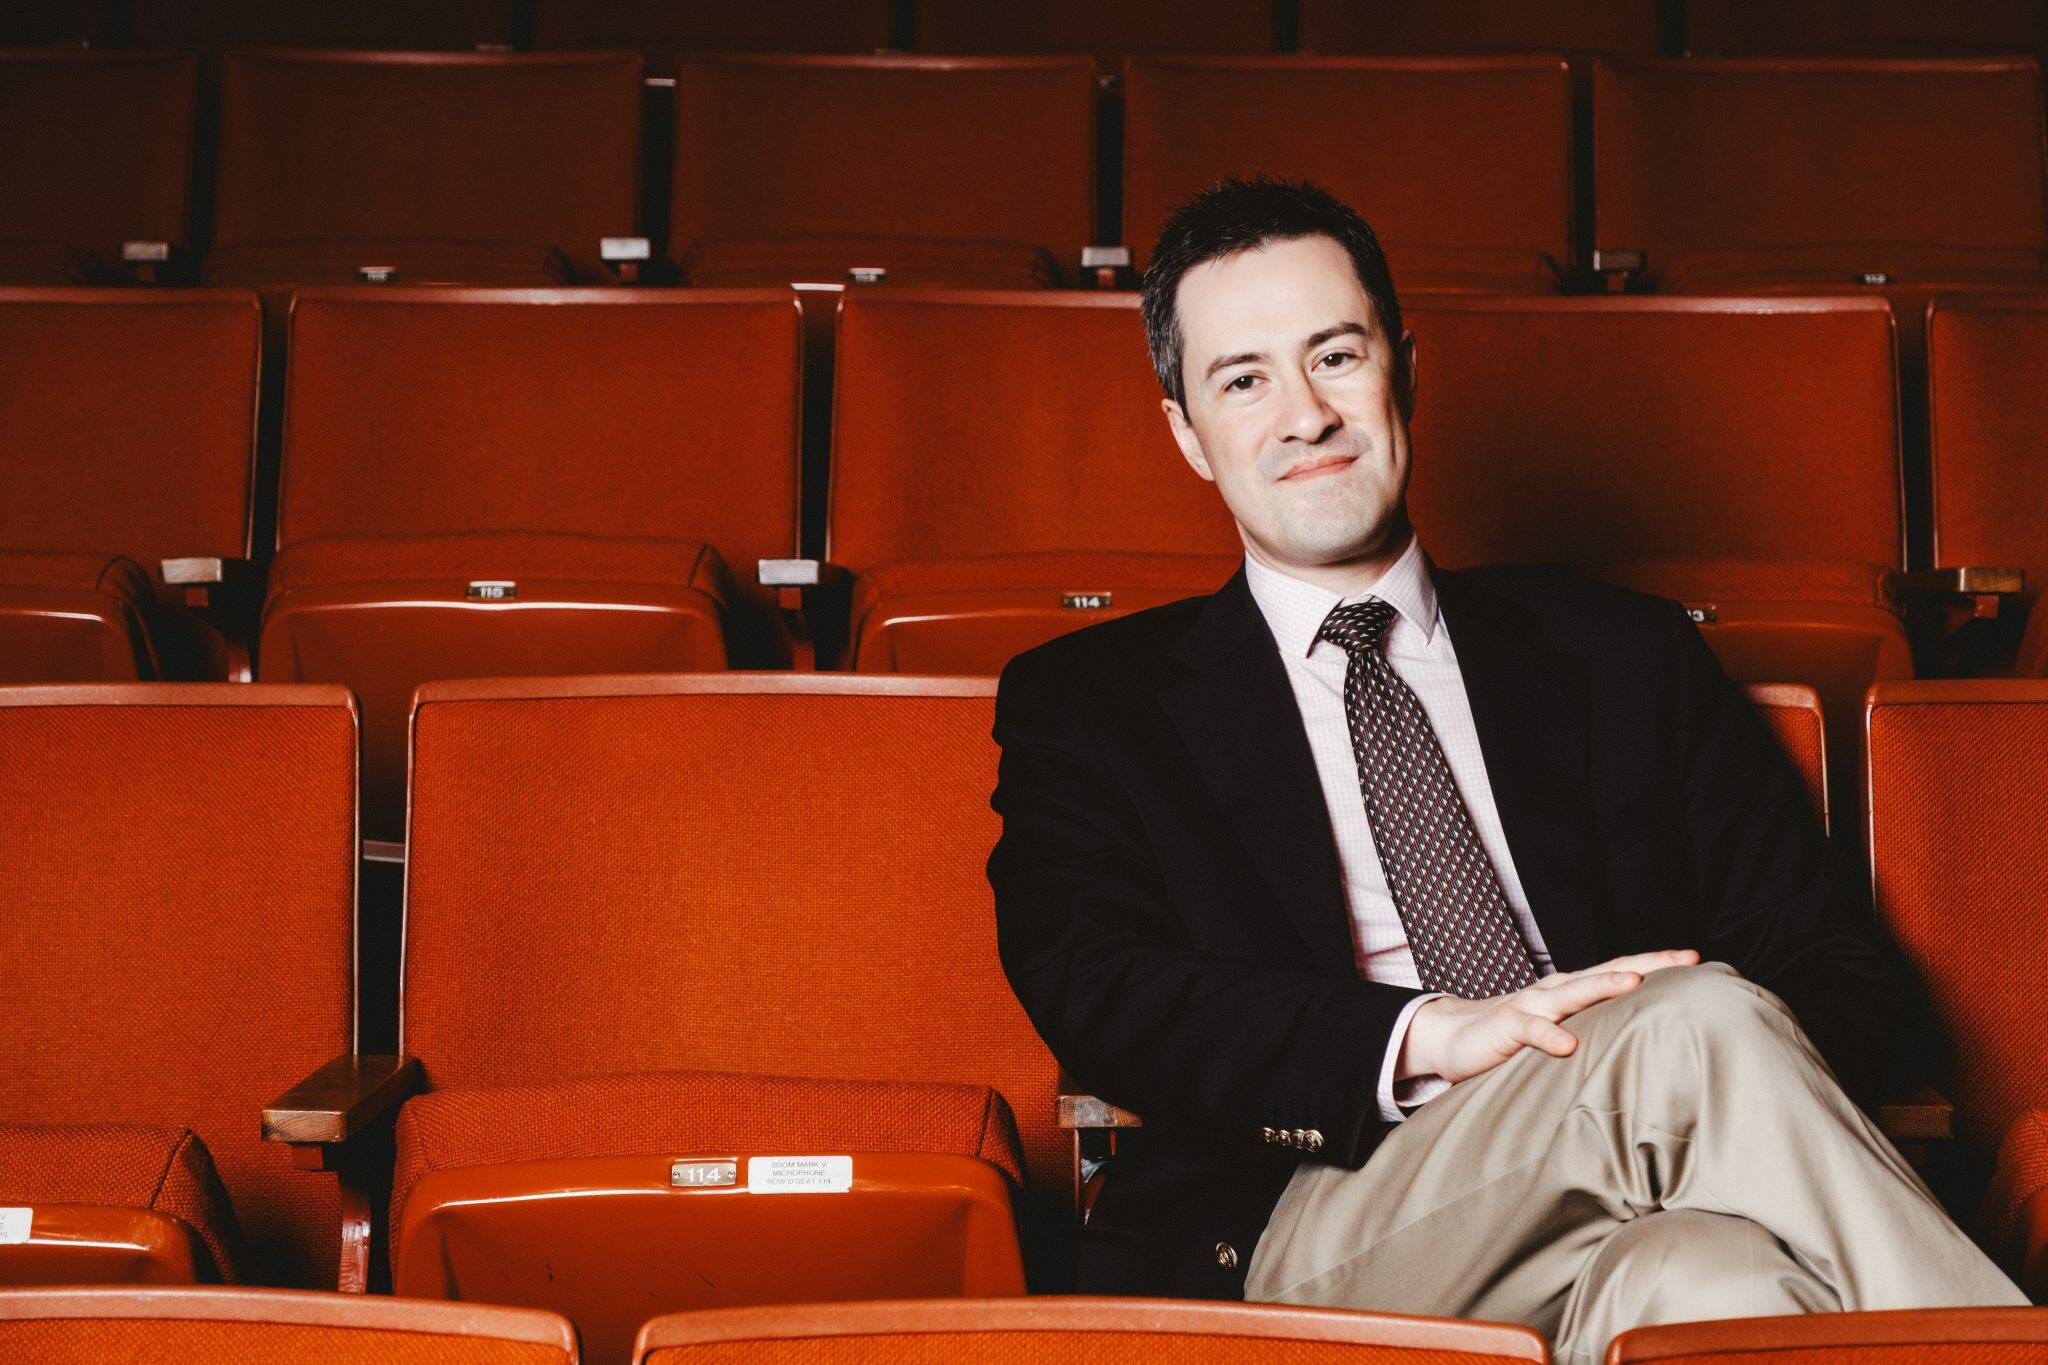 Andrew Brownell, an internationally acclaimed pianist who has performed worldwide the past two decades, is scheduled to play the first in a trio of concerts featuring the final piano sonatas of Franz Schubert. Brownell’s concert is scheduled at 7 p.m. March 10 at the Juneau Arts and Culture Center. (Publicity photo by Nathan Russell)